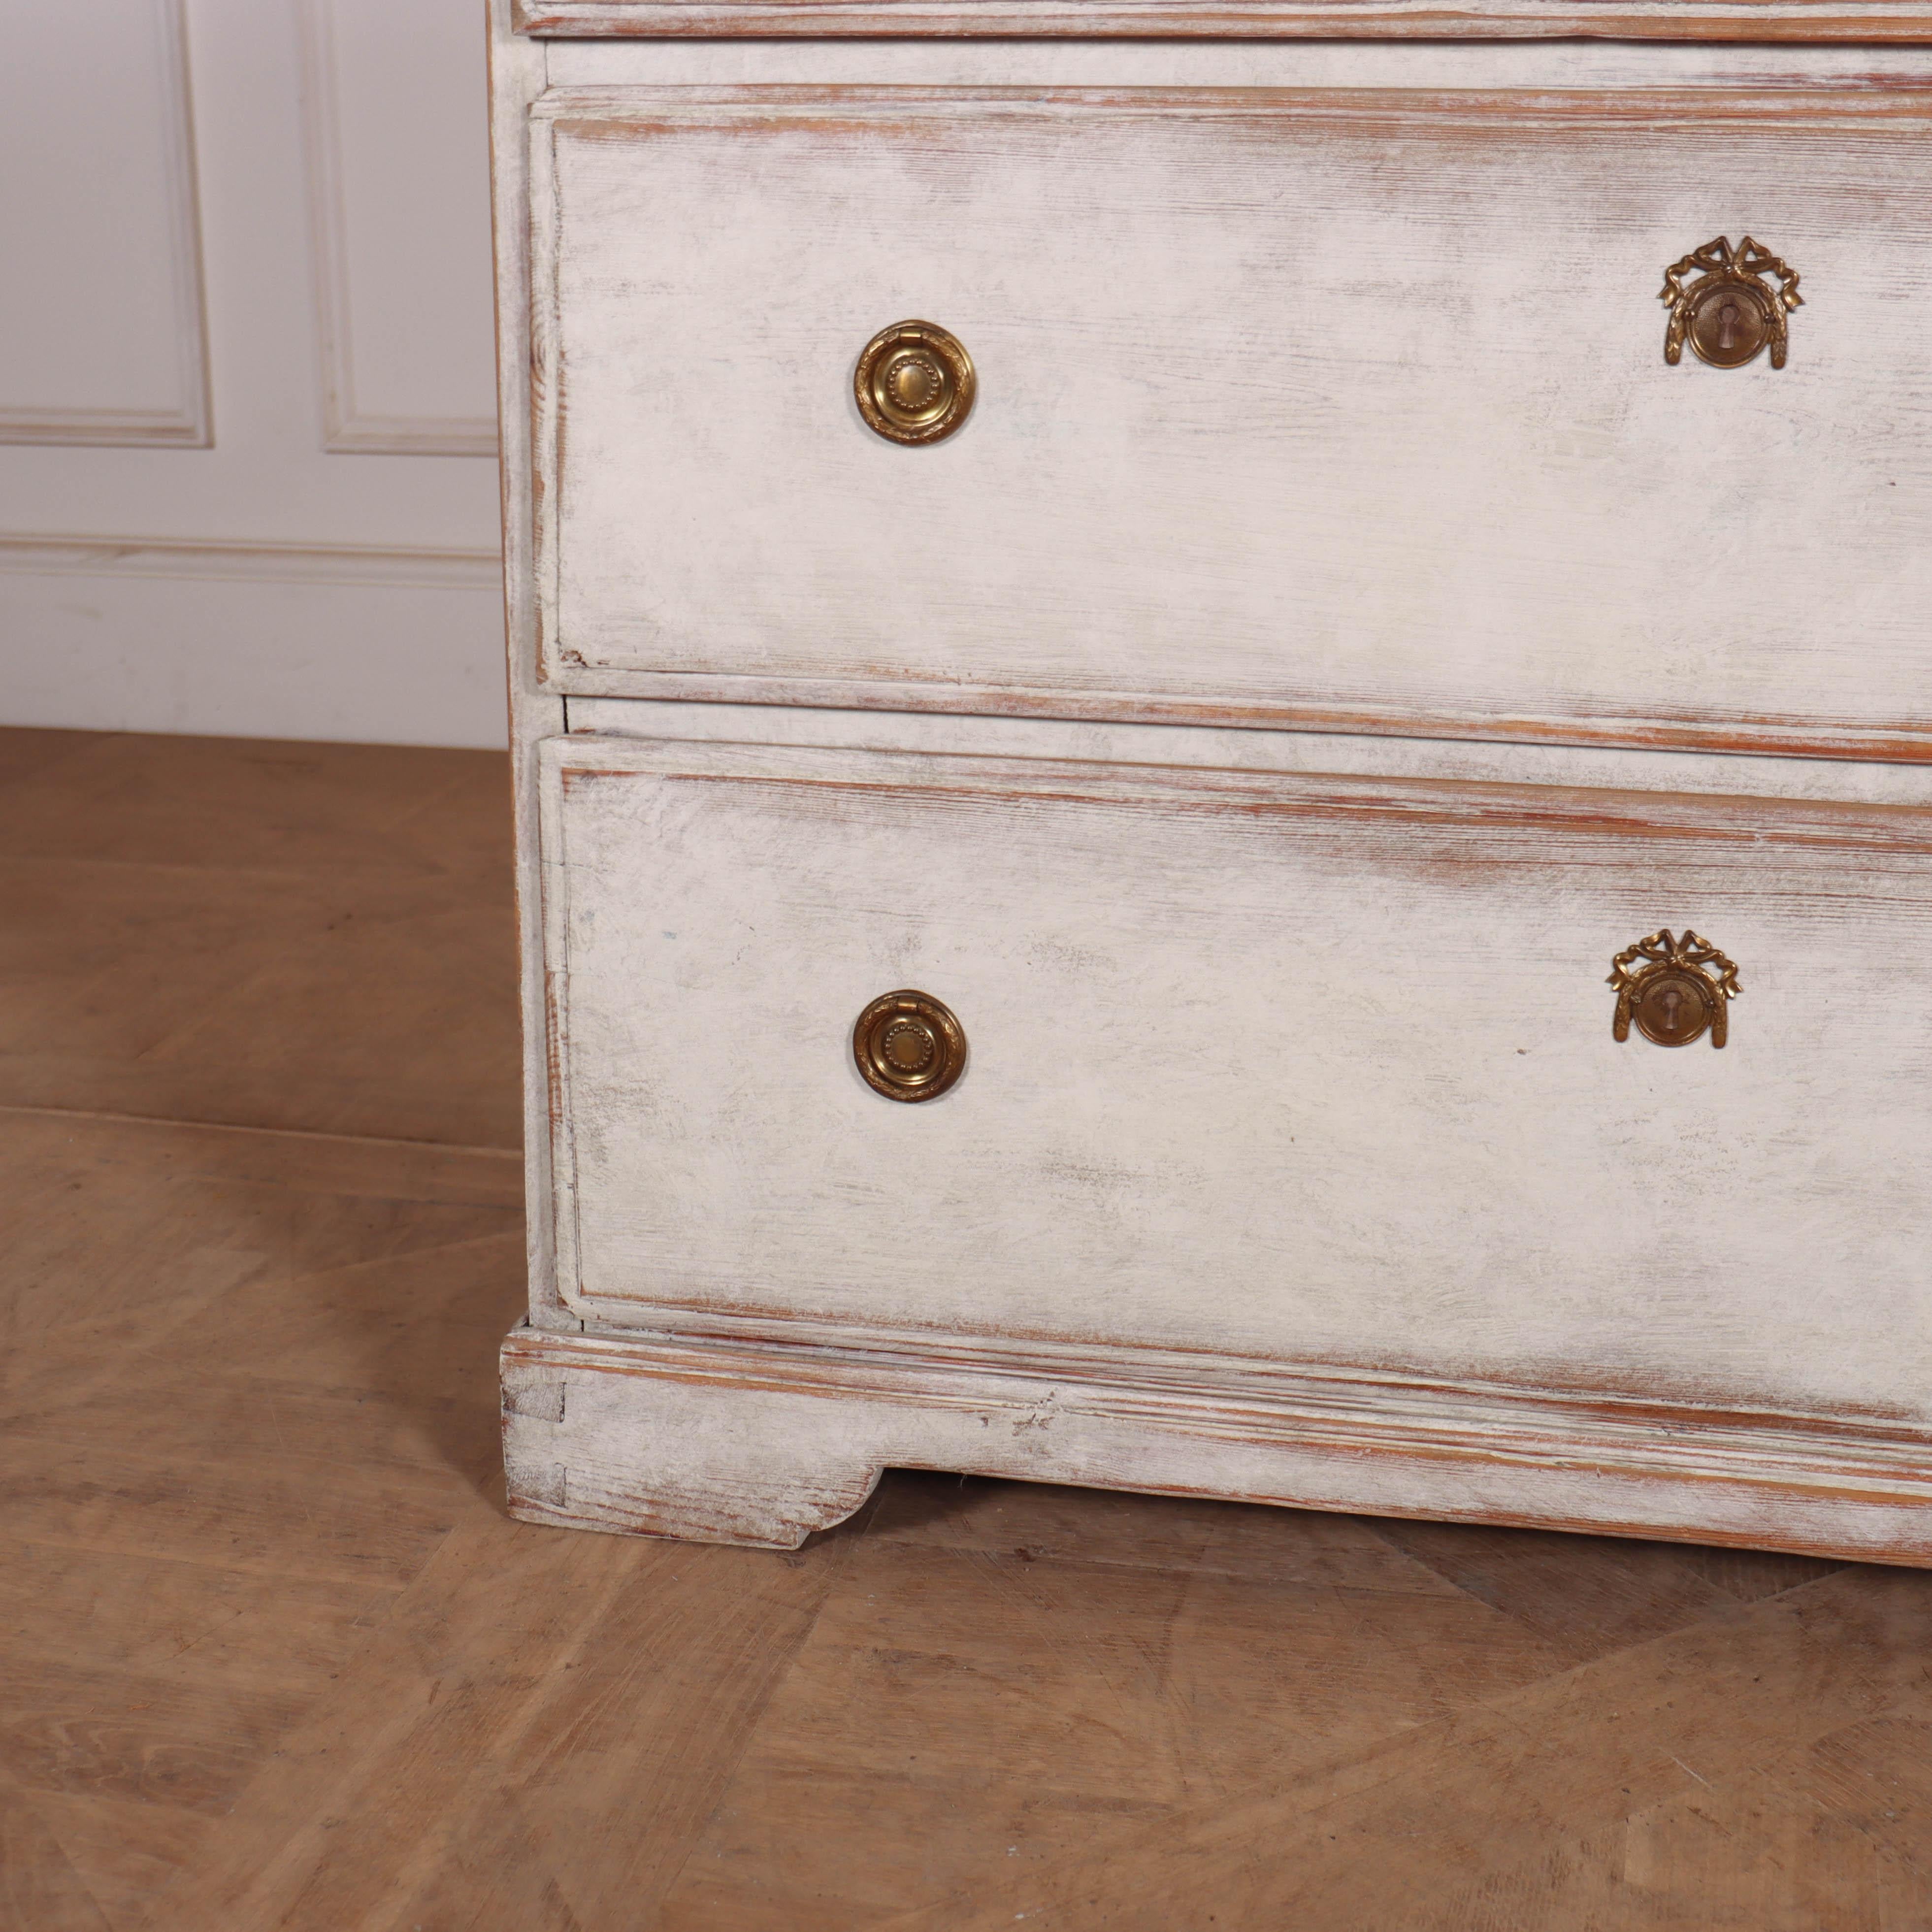 Early 19th C Swedish 3 drawer painted pine commode. 1820.

Ref: C.

Dimensions
38.5 inches (98 cms) Wide
18.5 inches (47 cms) Deep
34 inches (86 cms) High.